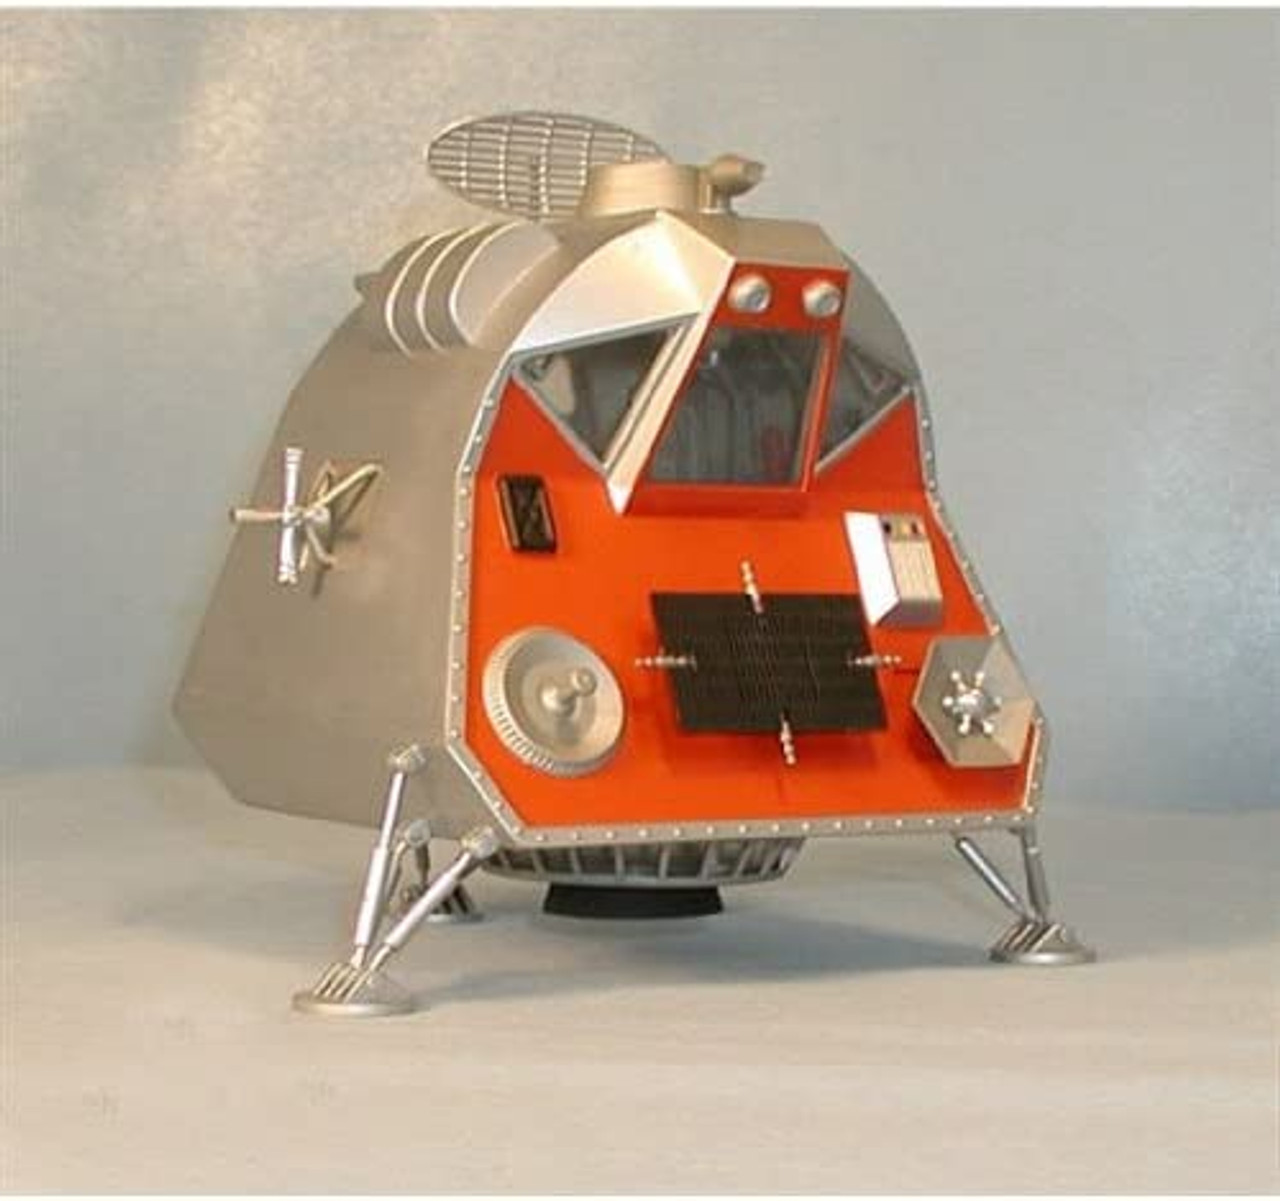 Moebius 1/24 Lost in Space-Space Pod 901